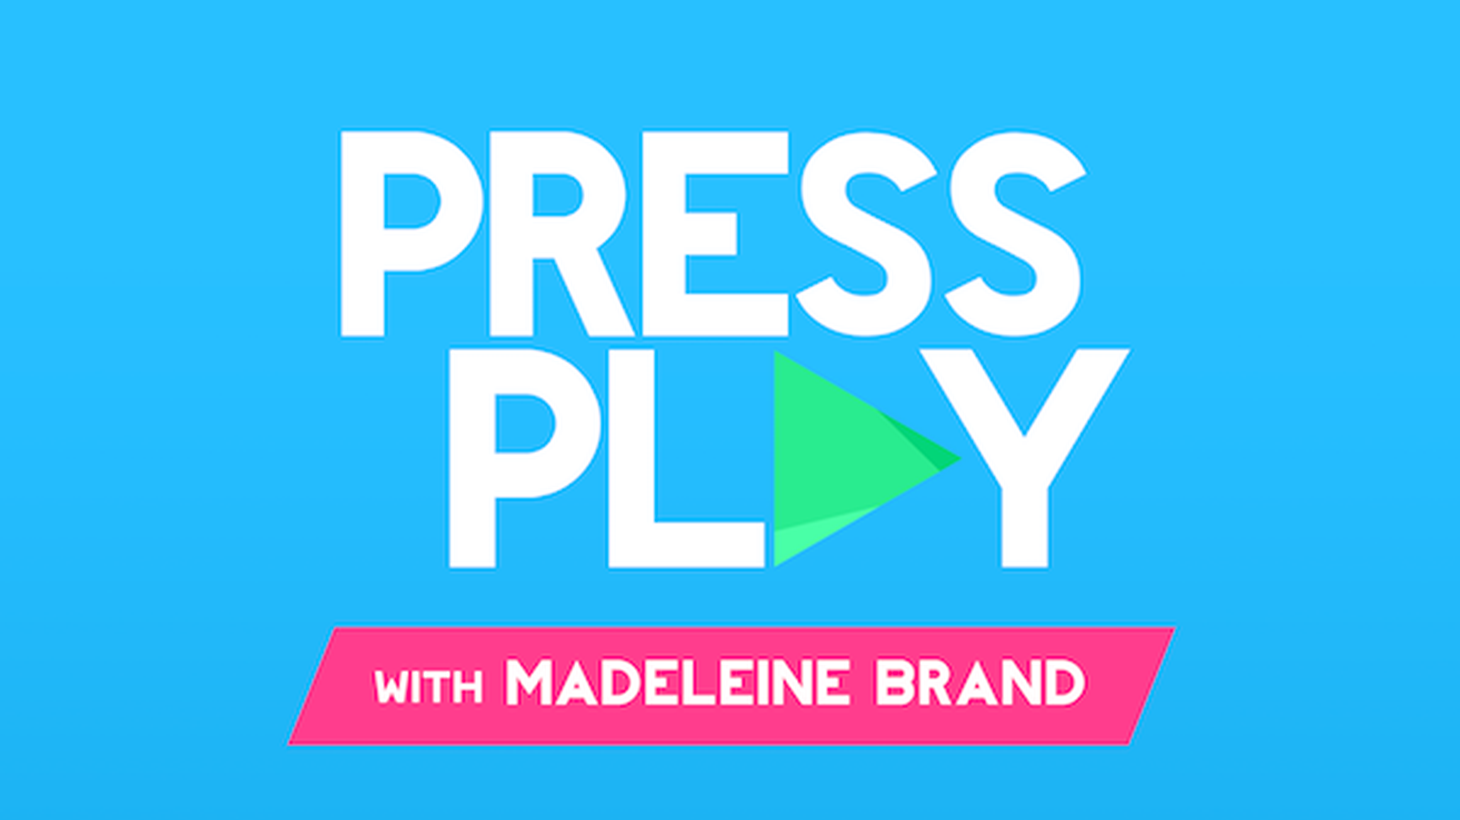 Today on Press Play, we pit the food editor of the New York Times against a writer who is so sick of her kitchen, she says she’ll never cook again. Home cooking: Is it worth it?